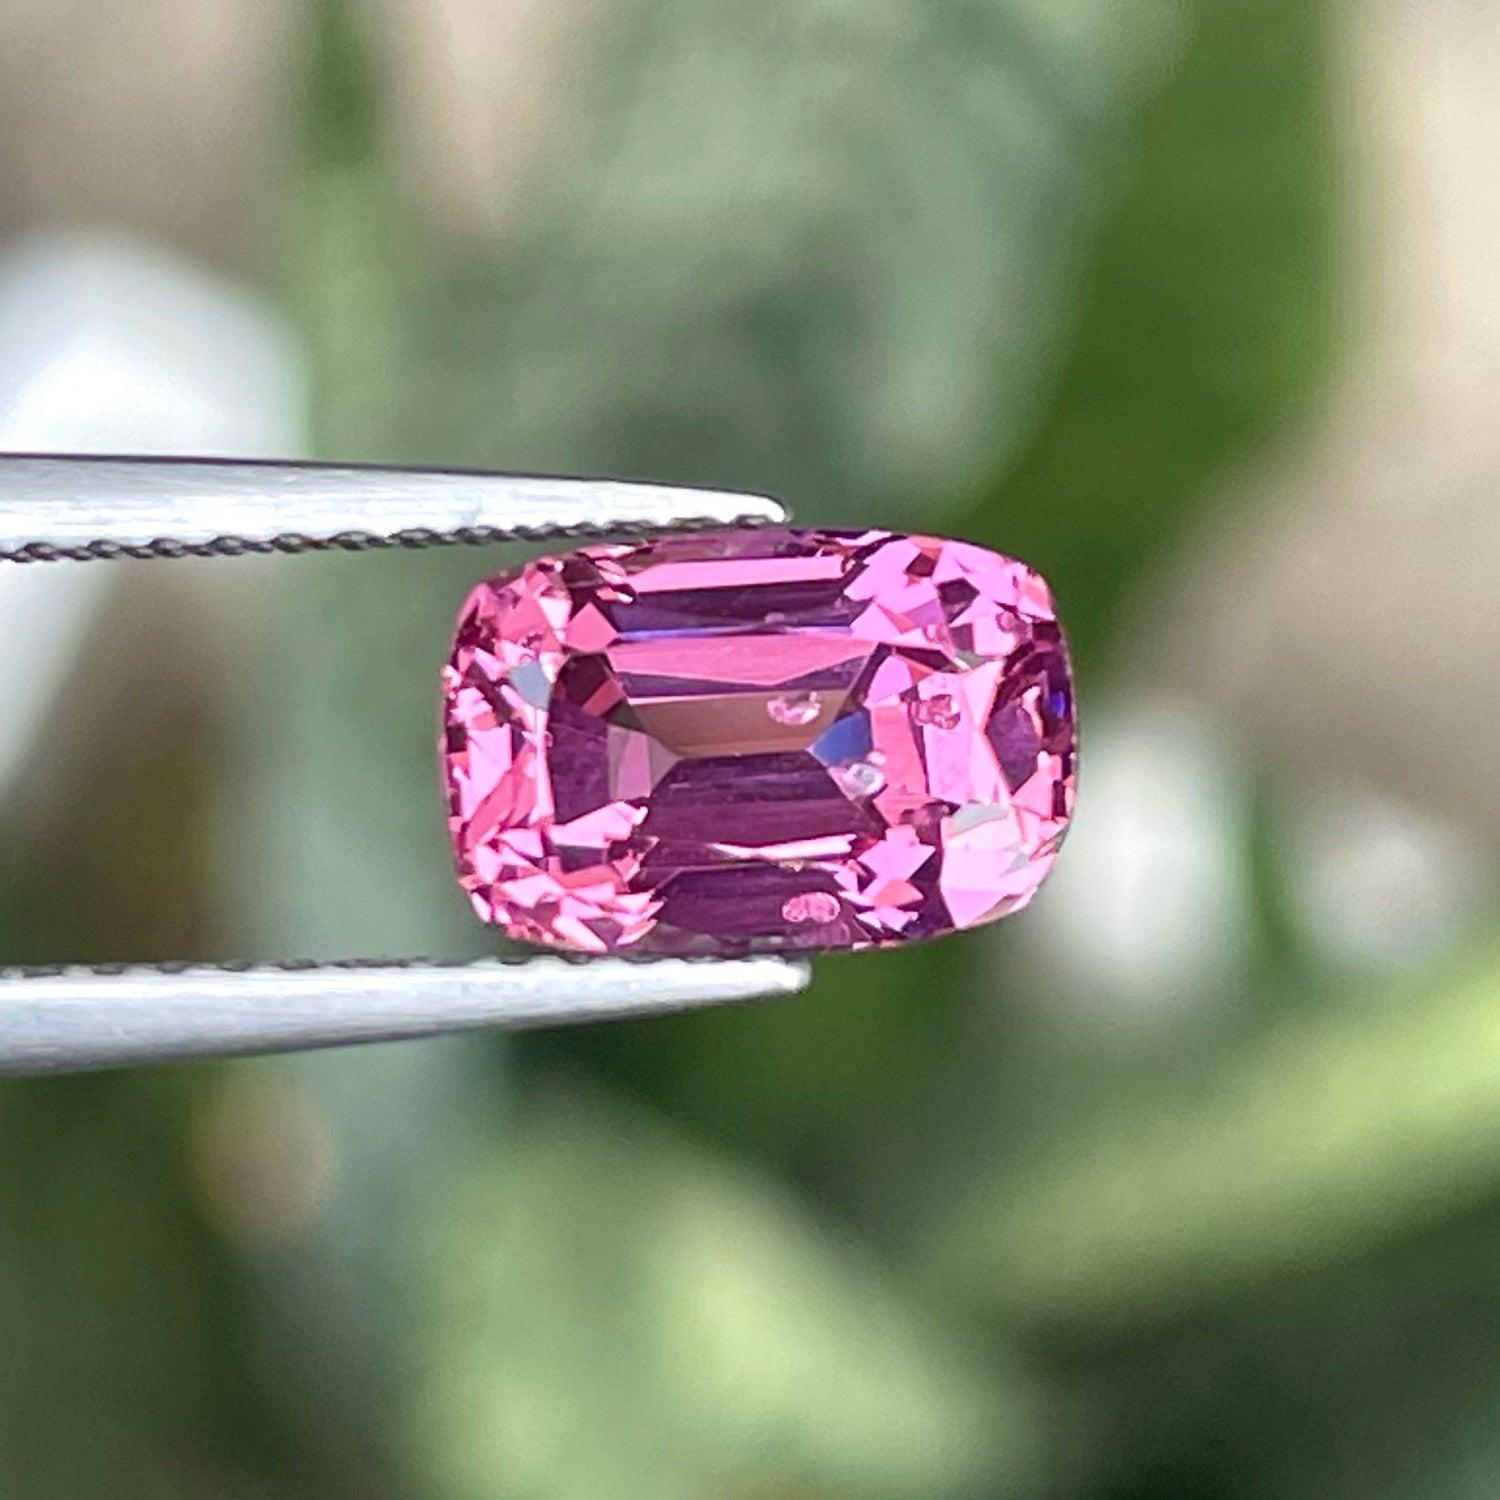 Stunning Hot Pink Natural Spinel Gemstone of 2.85 carats from Burma has a wonderful cut in a Cushion shape, incredible Pink color. Great brilliance. This gem is SI Clarity.

Product Information:
GEMSTONE TYPE:	Stunning Hot Pink Natural Spinel